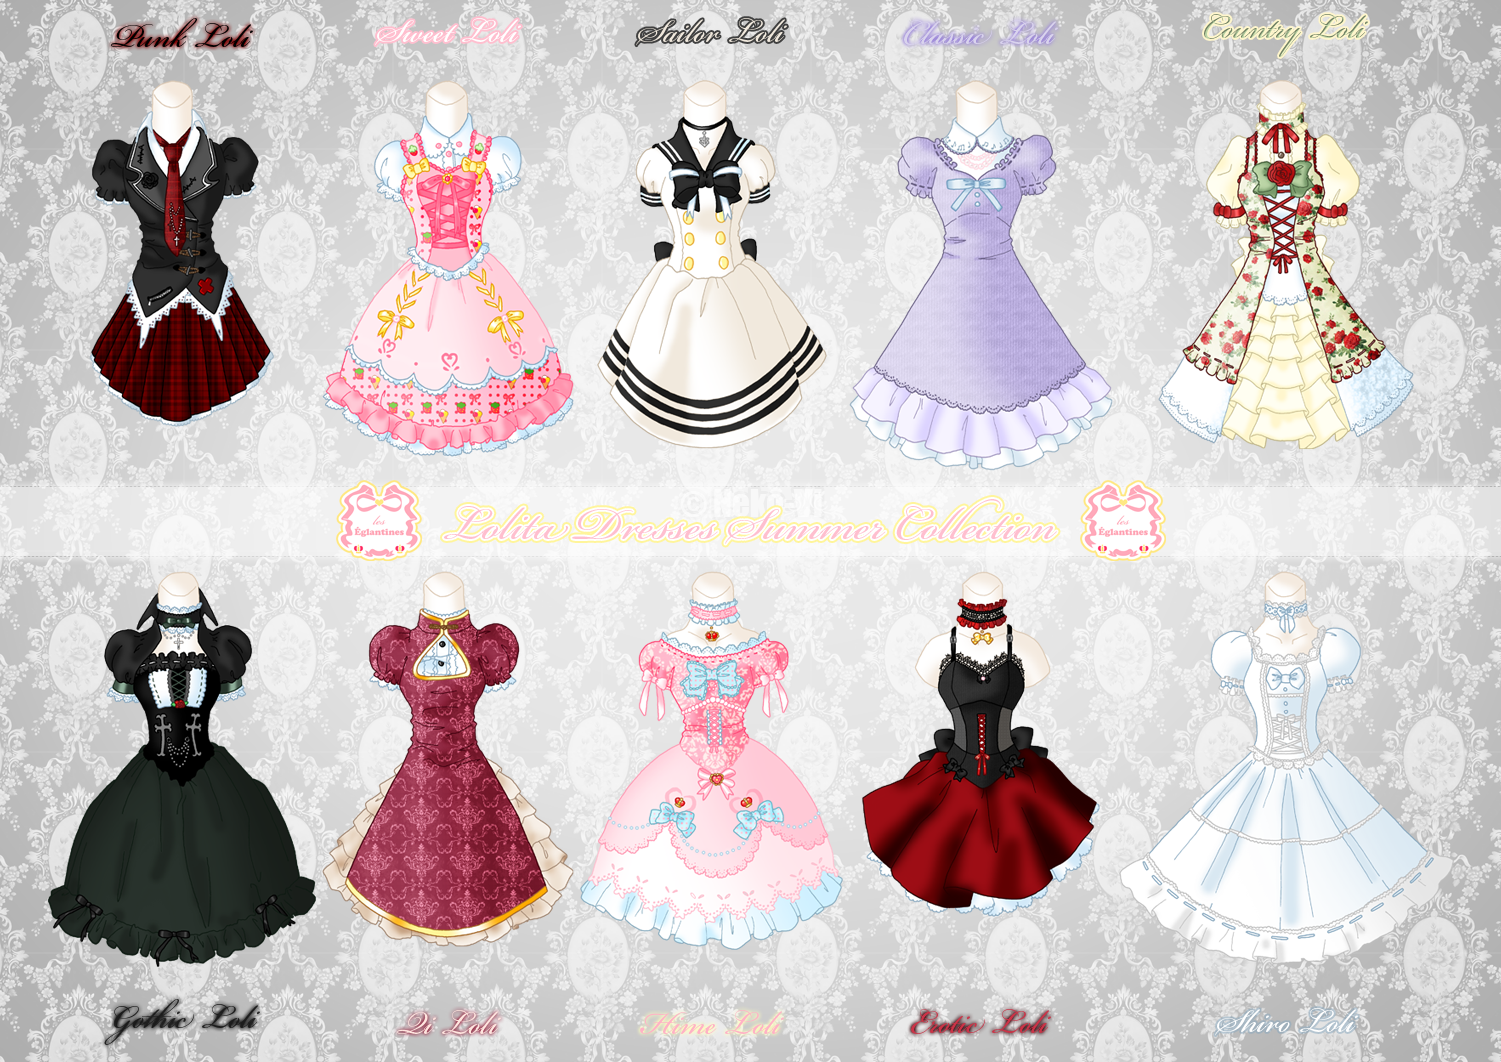 Loli Dresses Summer Collection